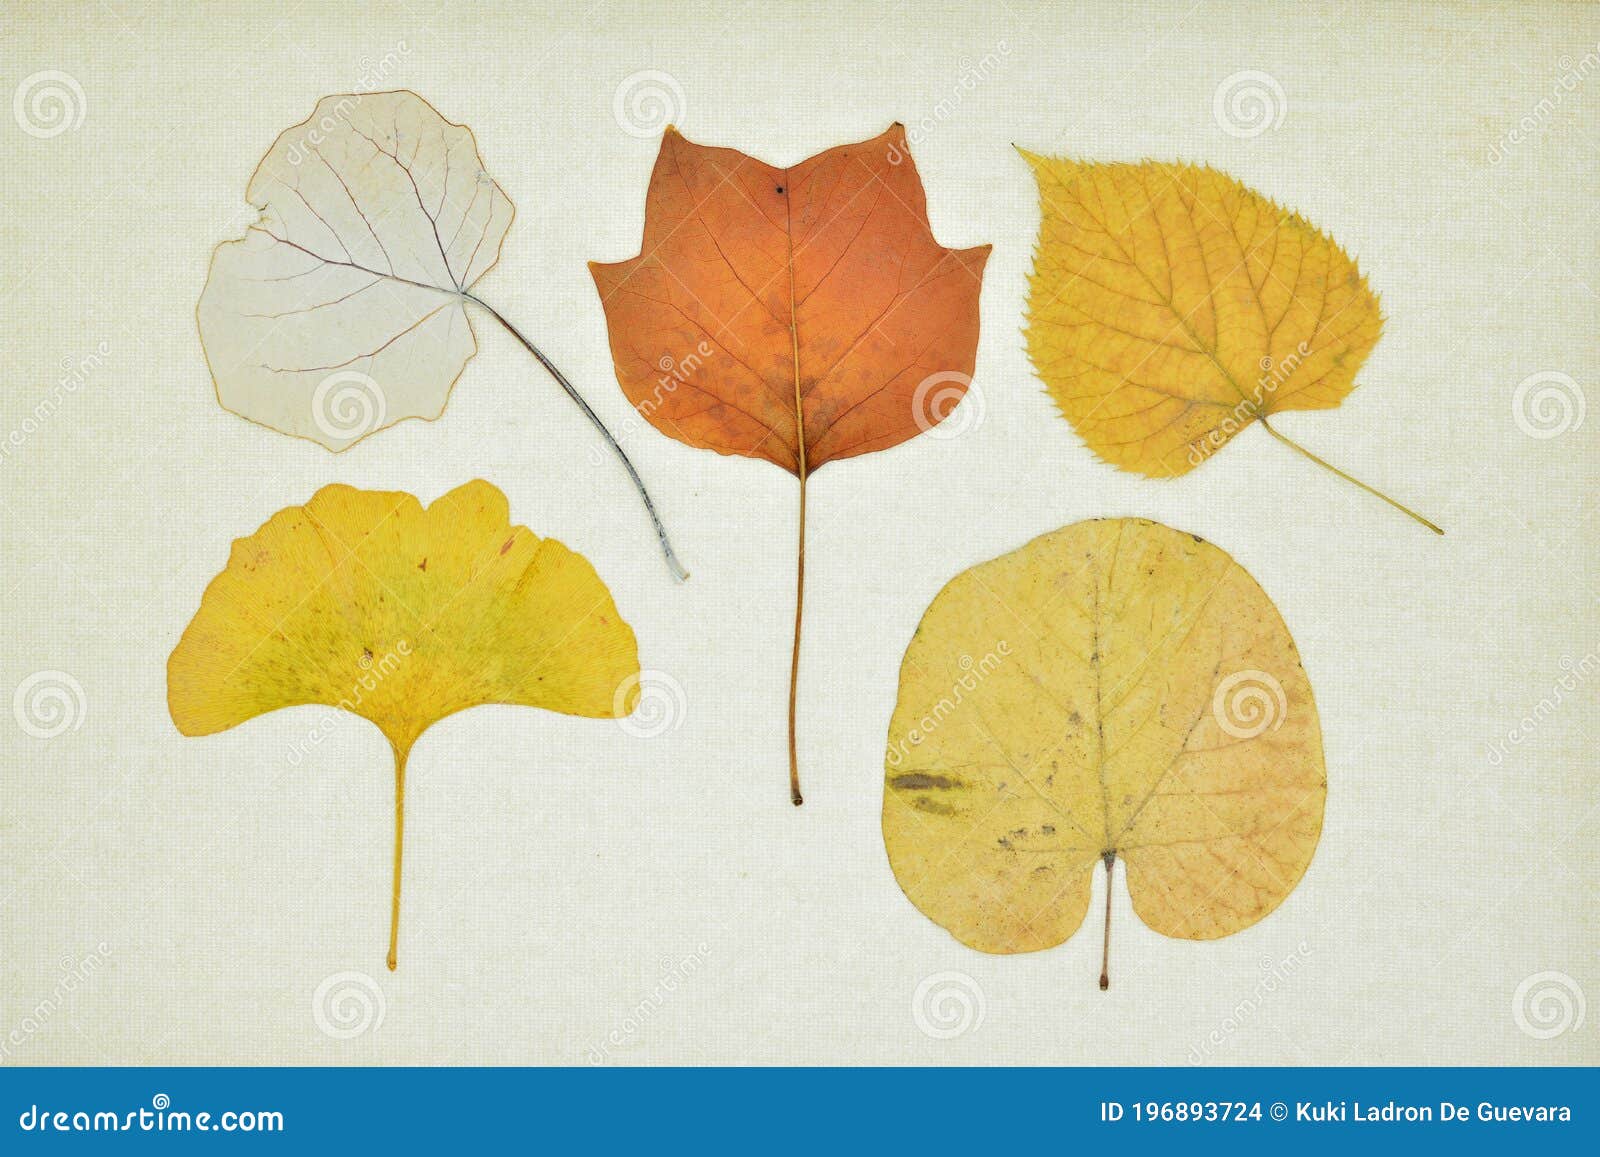 collection of dry leaves in autumn